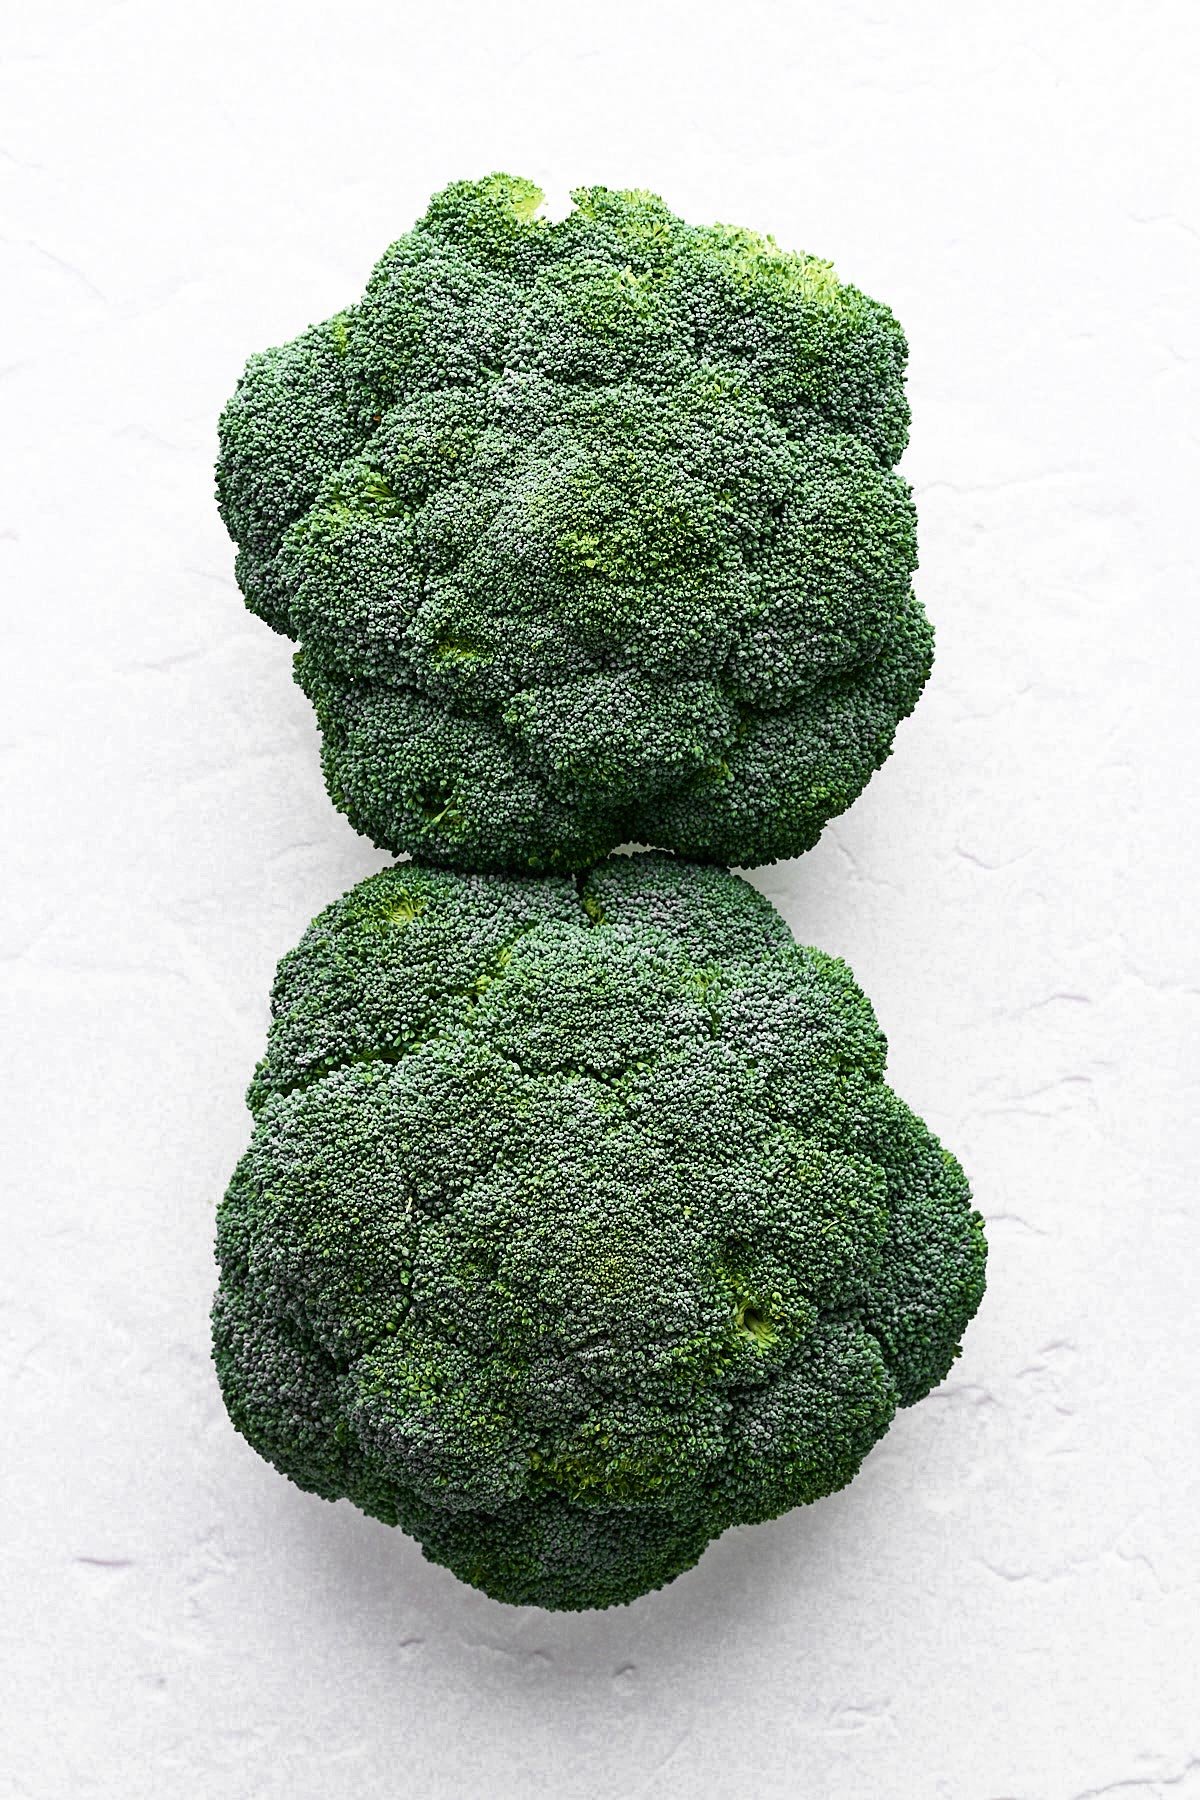 Two large heads of broccoli.